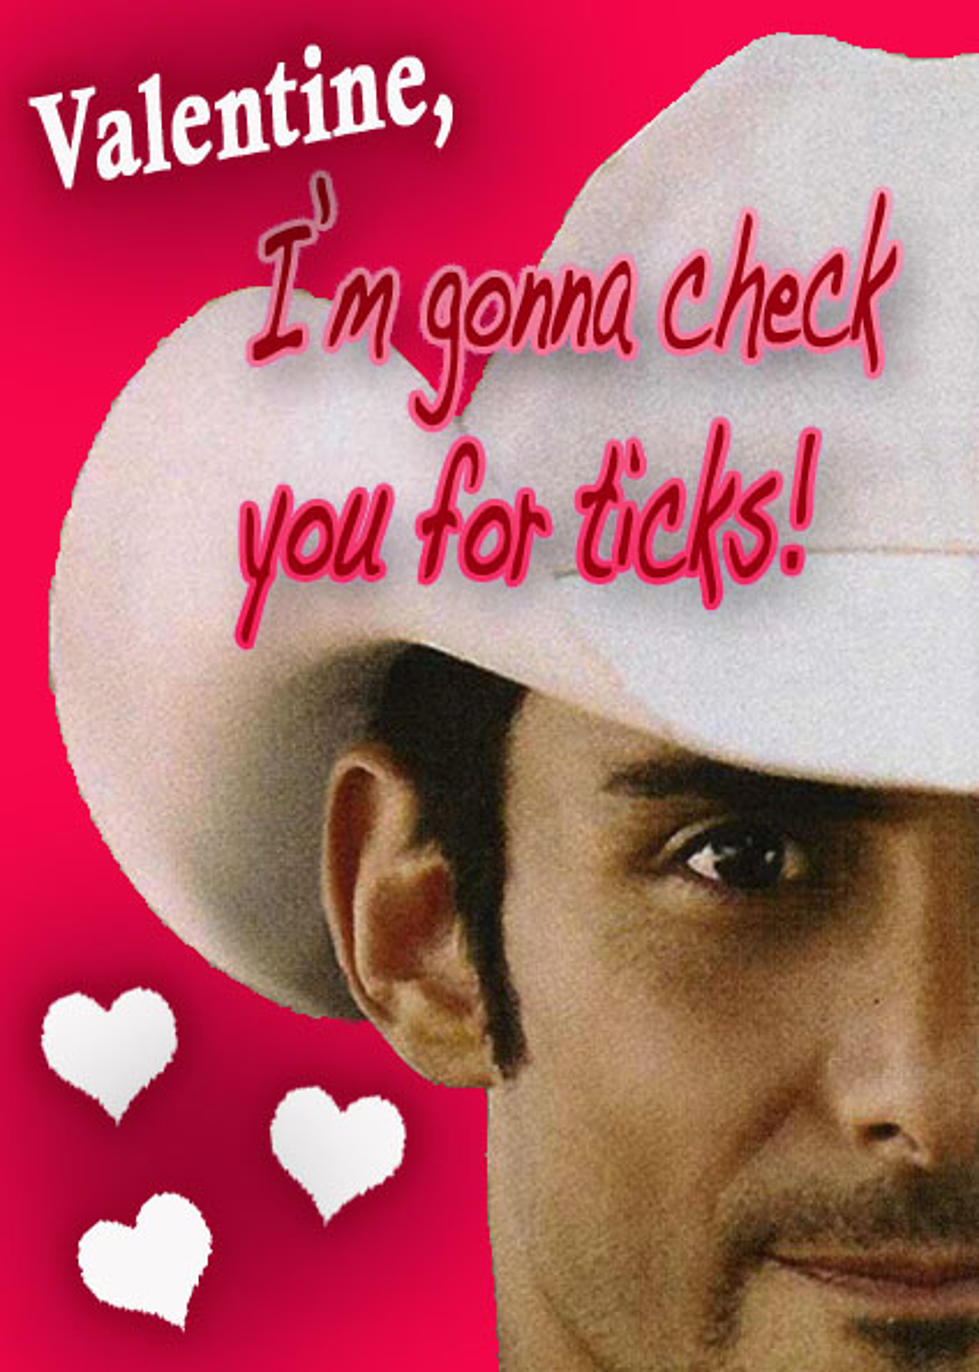 Check Out Check Out Brad Paisley’s Valentine’s Day Card